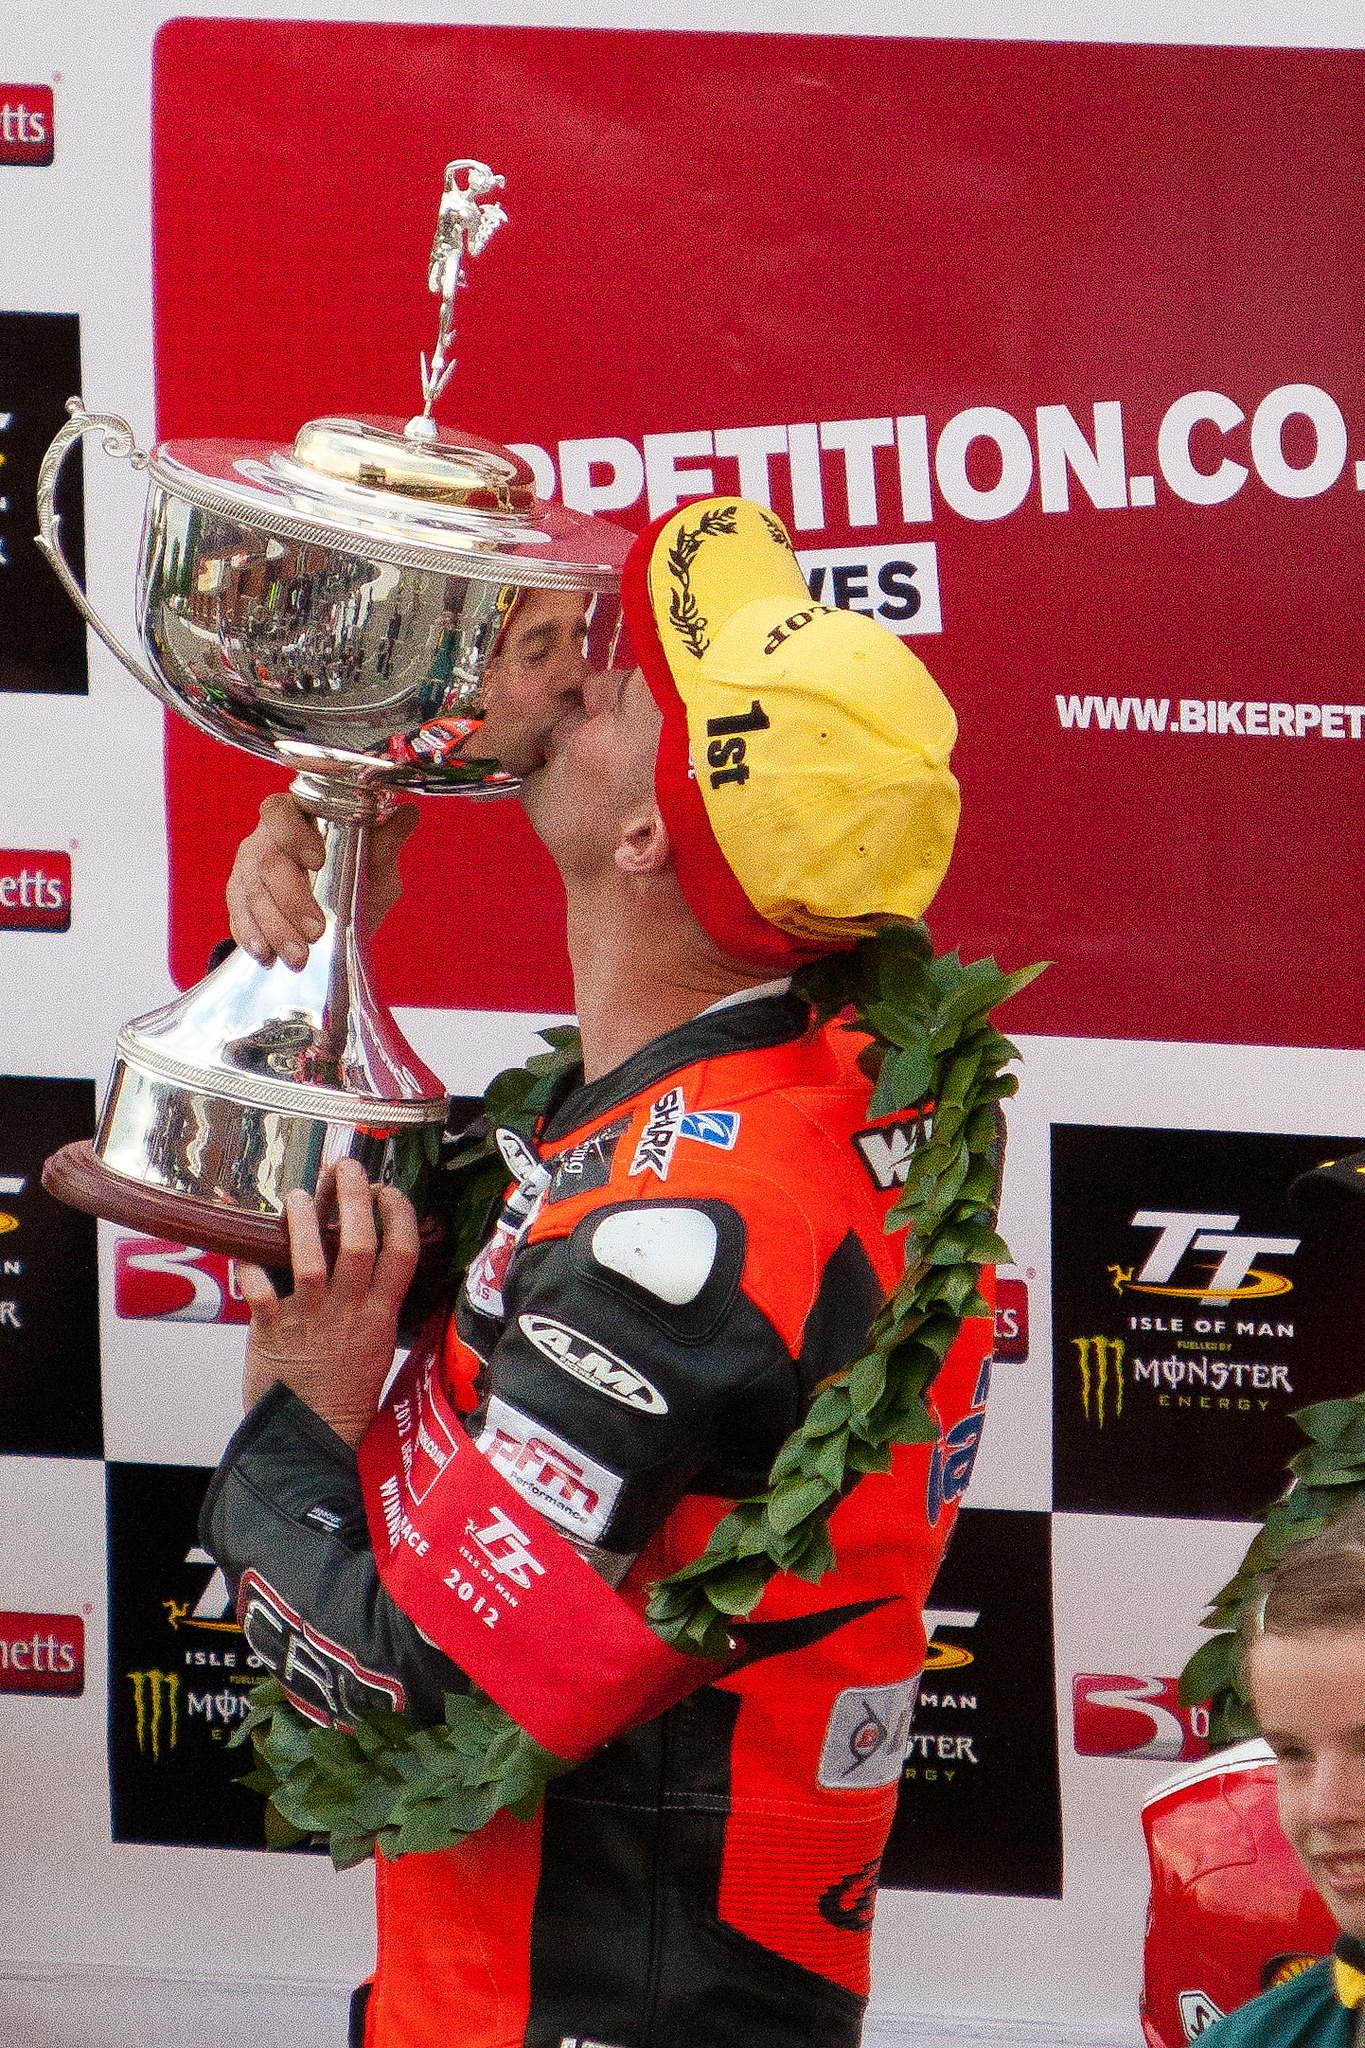 Ryan Farquhar gets to know the Lightweight TT trophy image from Phil Long on flickr